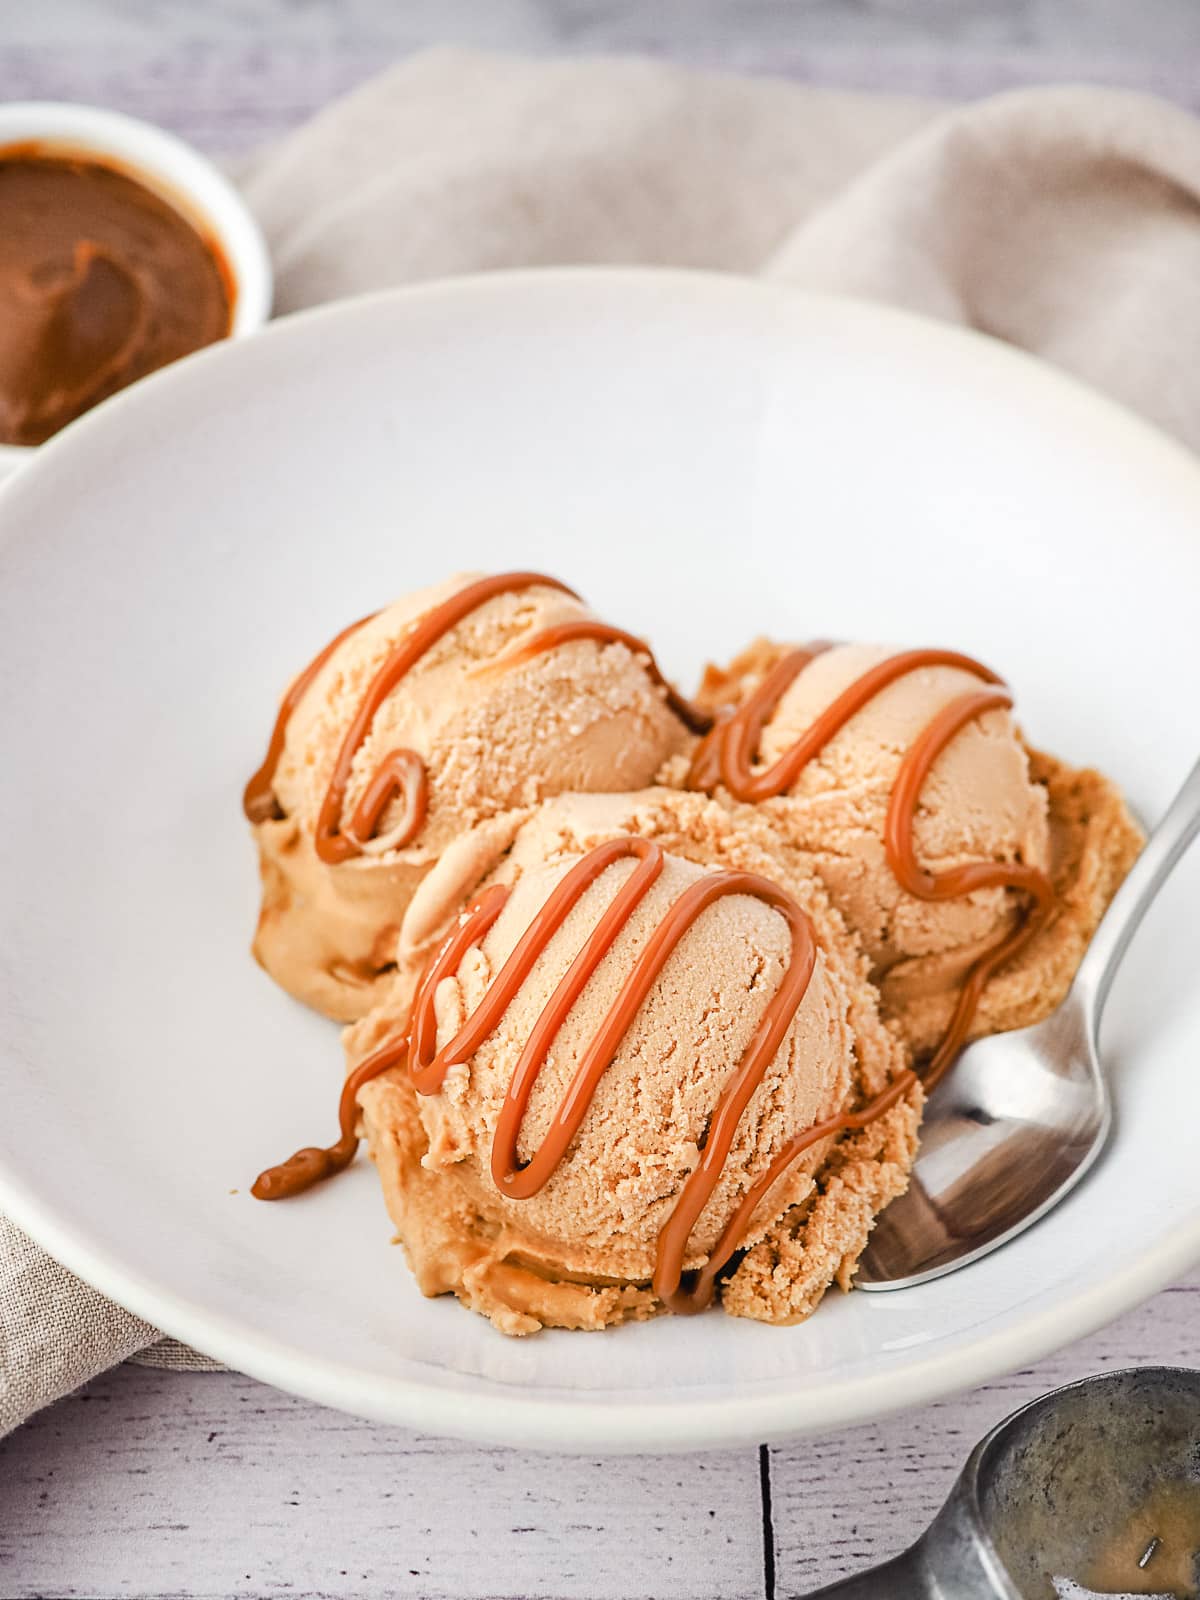 Three scoops of ice cream in a bowl with dulce de leche drizzle and dulce de leche in background.